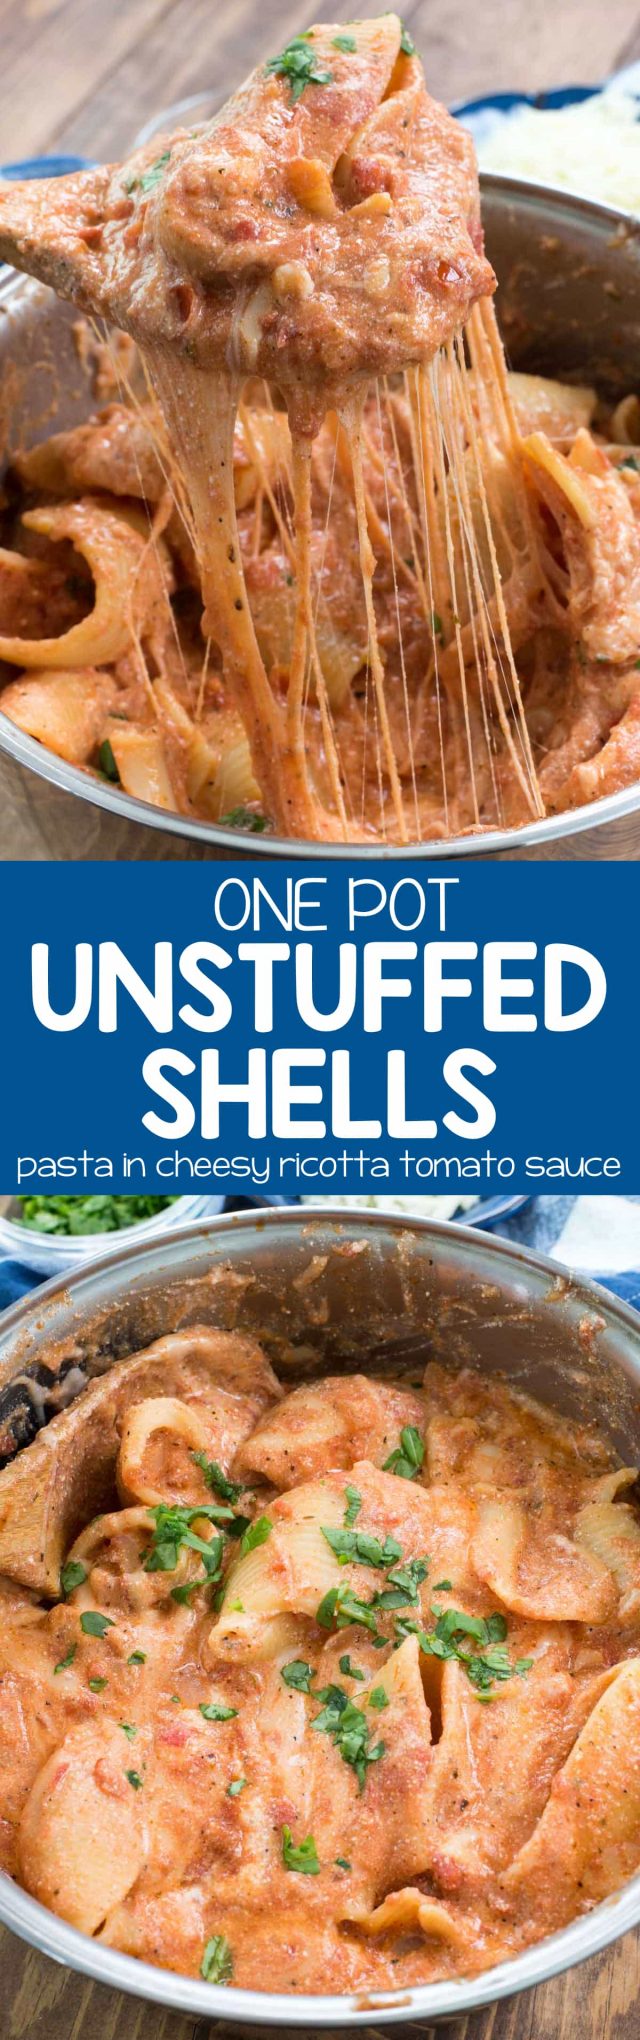 One Pot Unstuffed Shells - this easy stuffed shell recipe is all made in one pot without all the extra work! It's a great weeknight meal and everyone loves it!